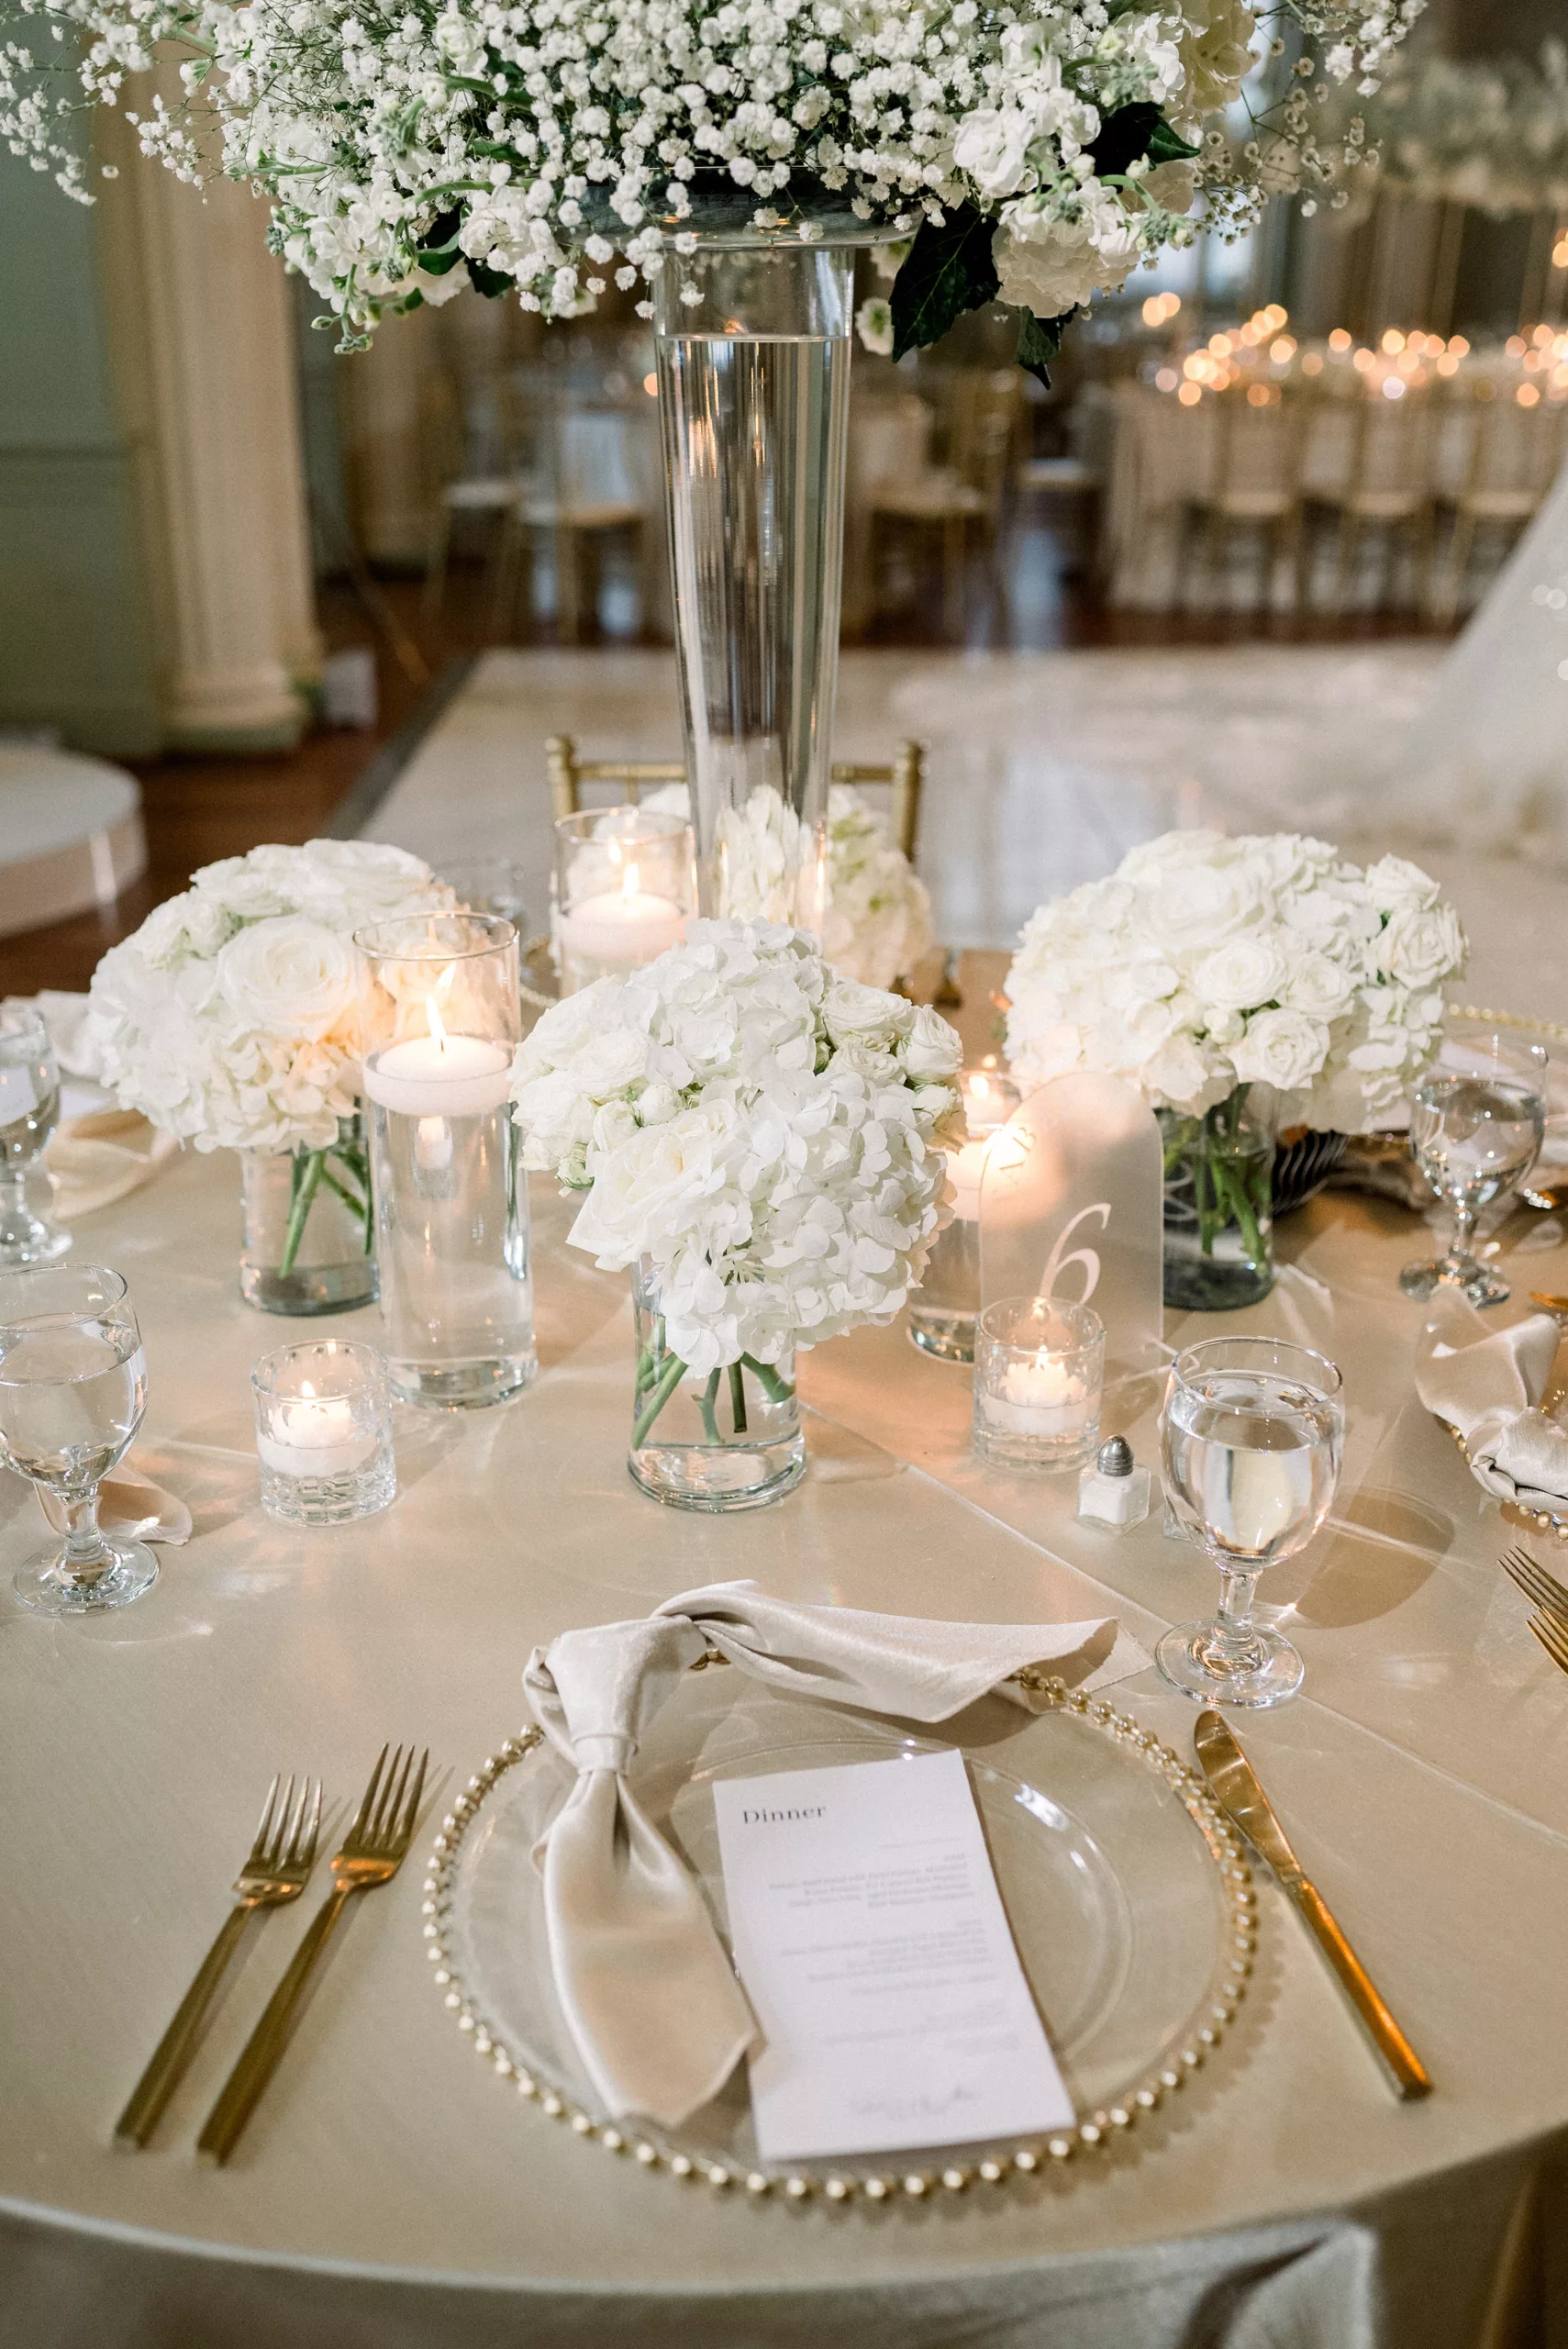 Details of a reception table with white roses and gold utensils